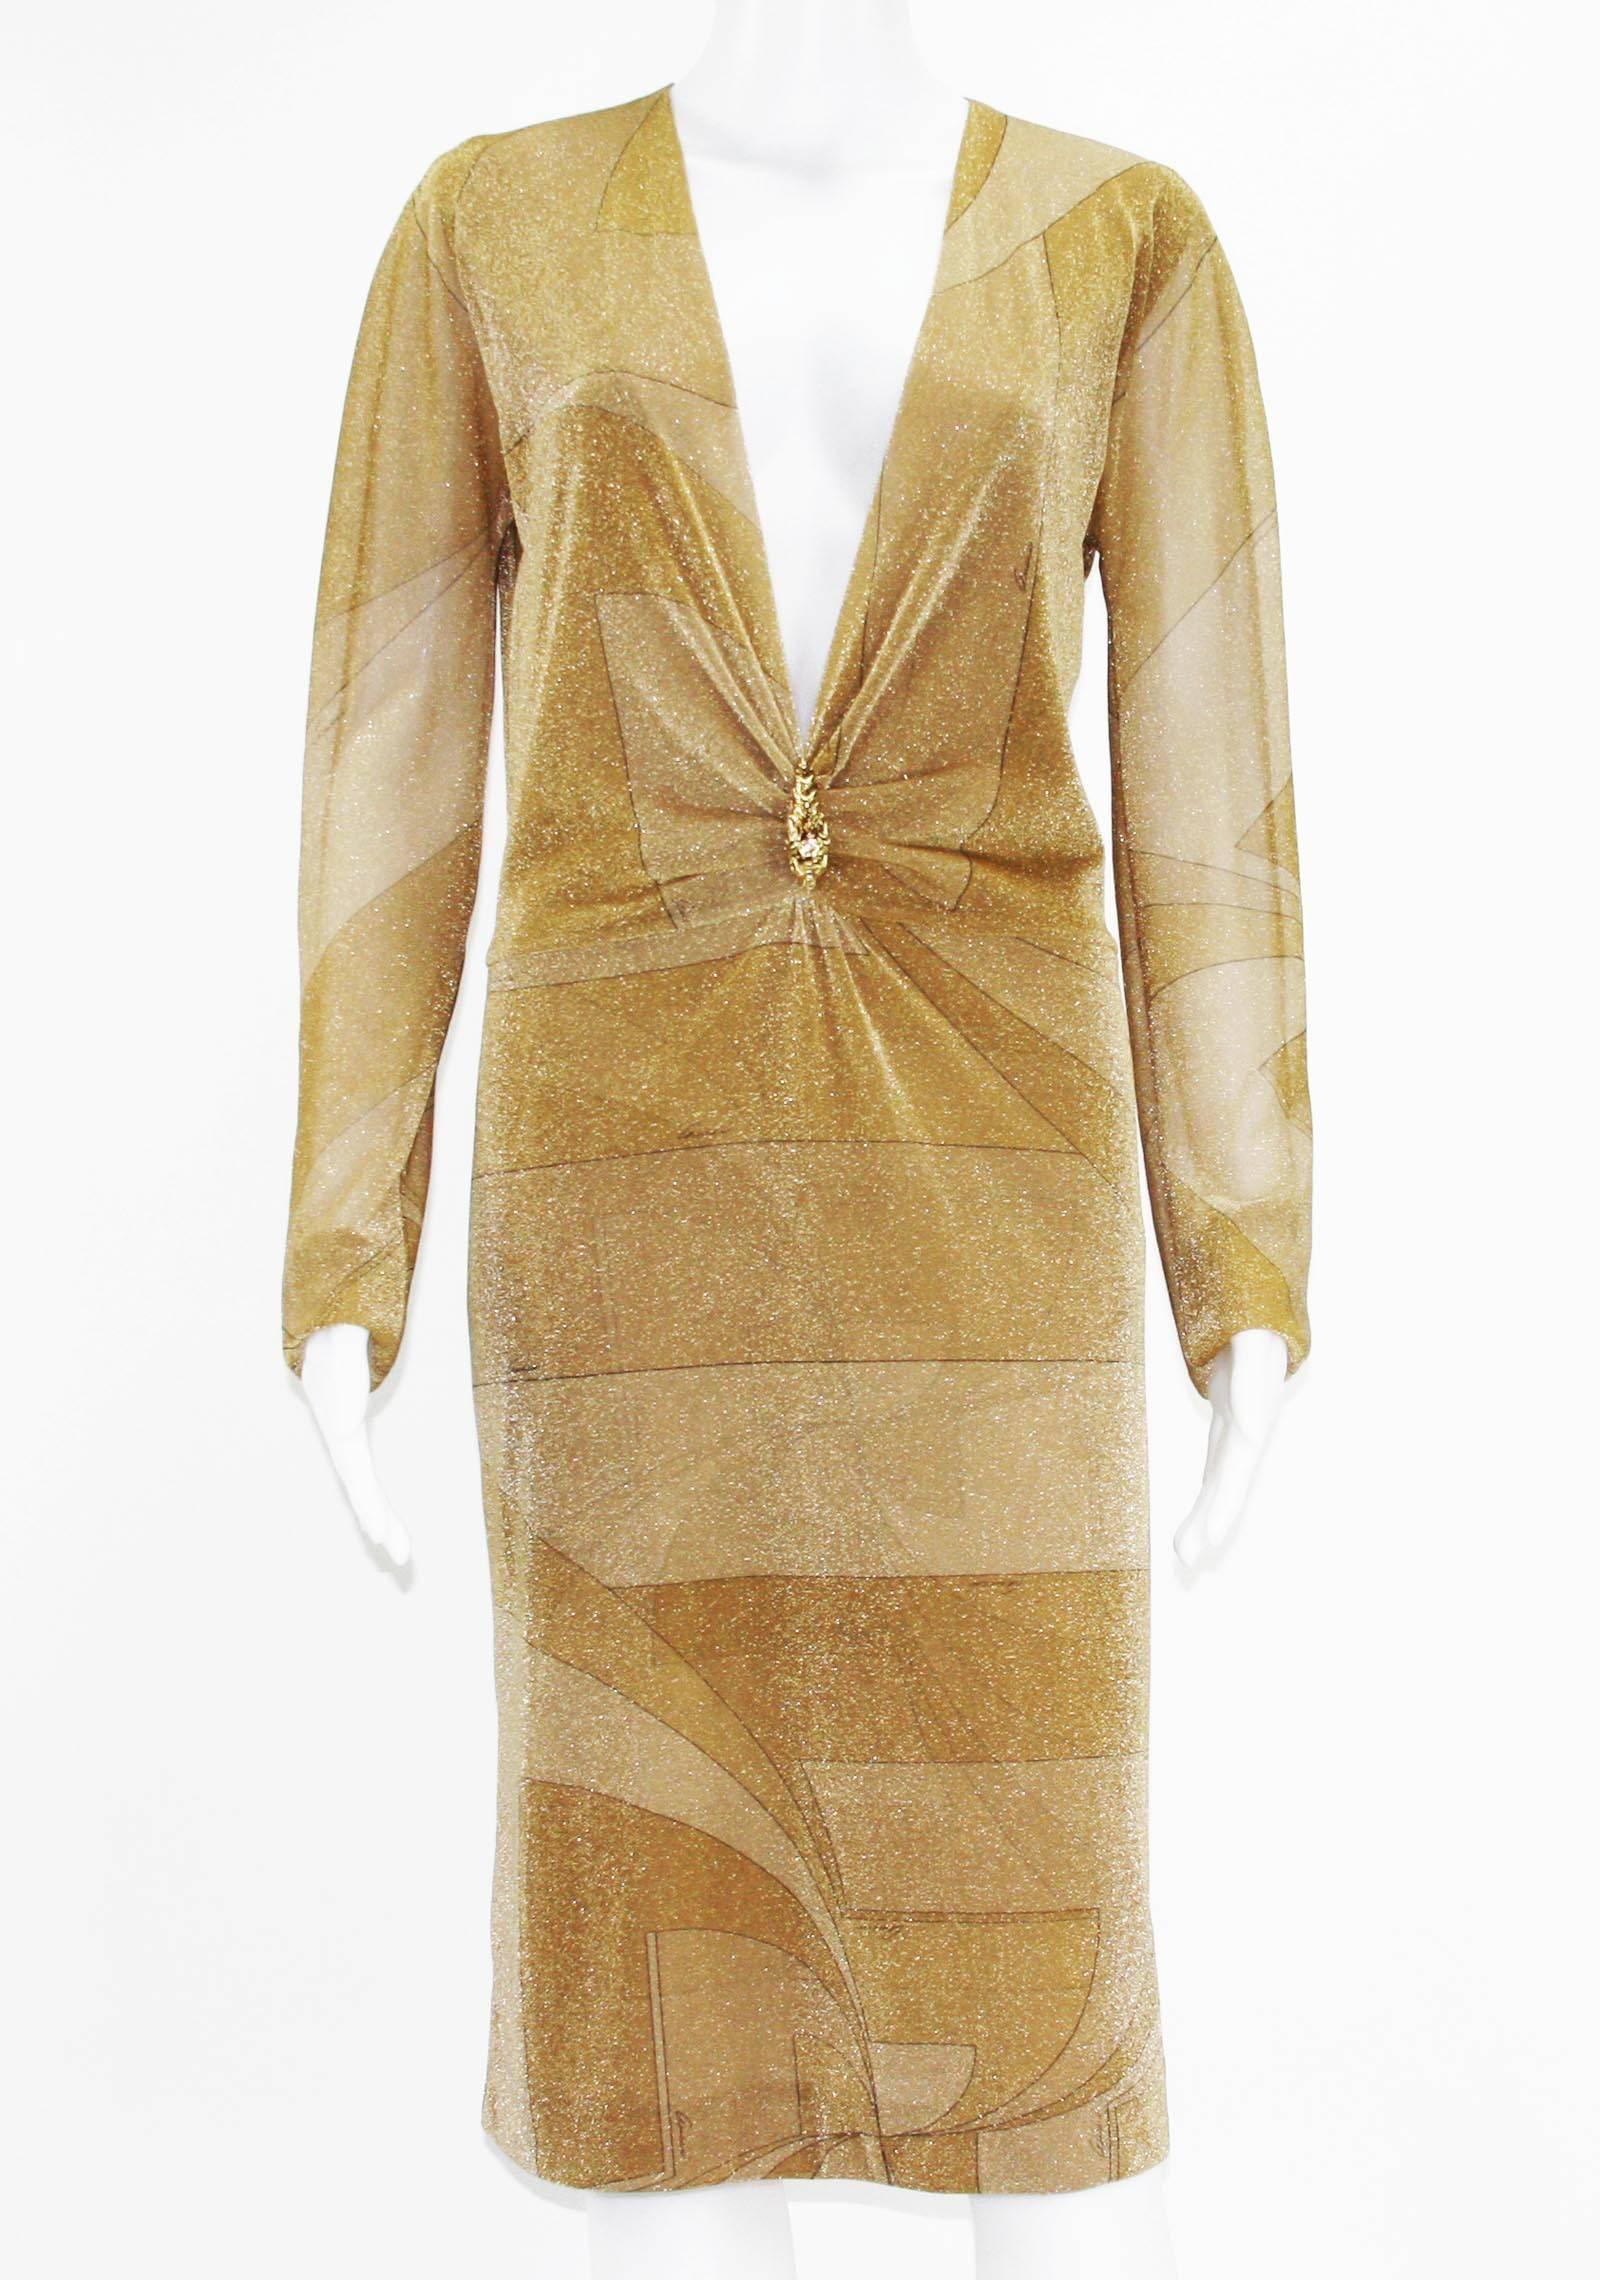 Vintage New Tom Ford for Gucci Deep Plunging Dress
Fall/Winter 2000 Collection
Designer sizes available 40, 42, 44 - US 4, 6, 8.
Gold/Tan Metallic Signature Gucci Cocktail Dress, Deep Plunging Neckline, Gold-tone Lion Brooch, Fully Lined in Metallic